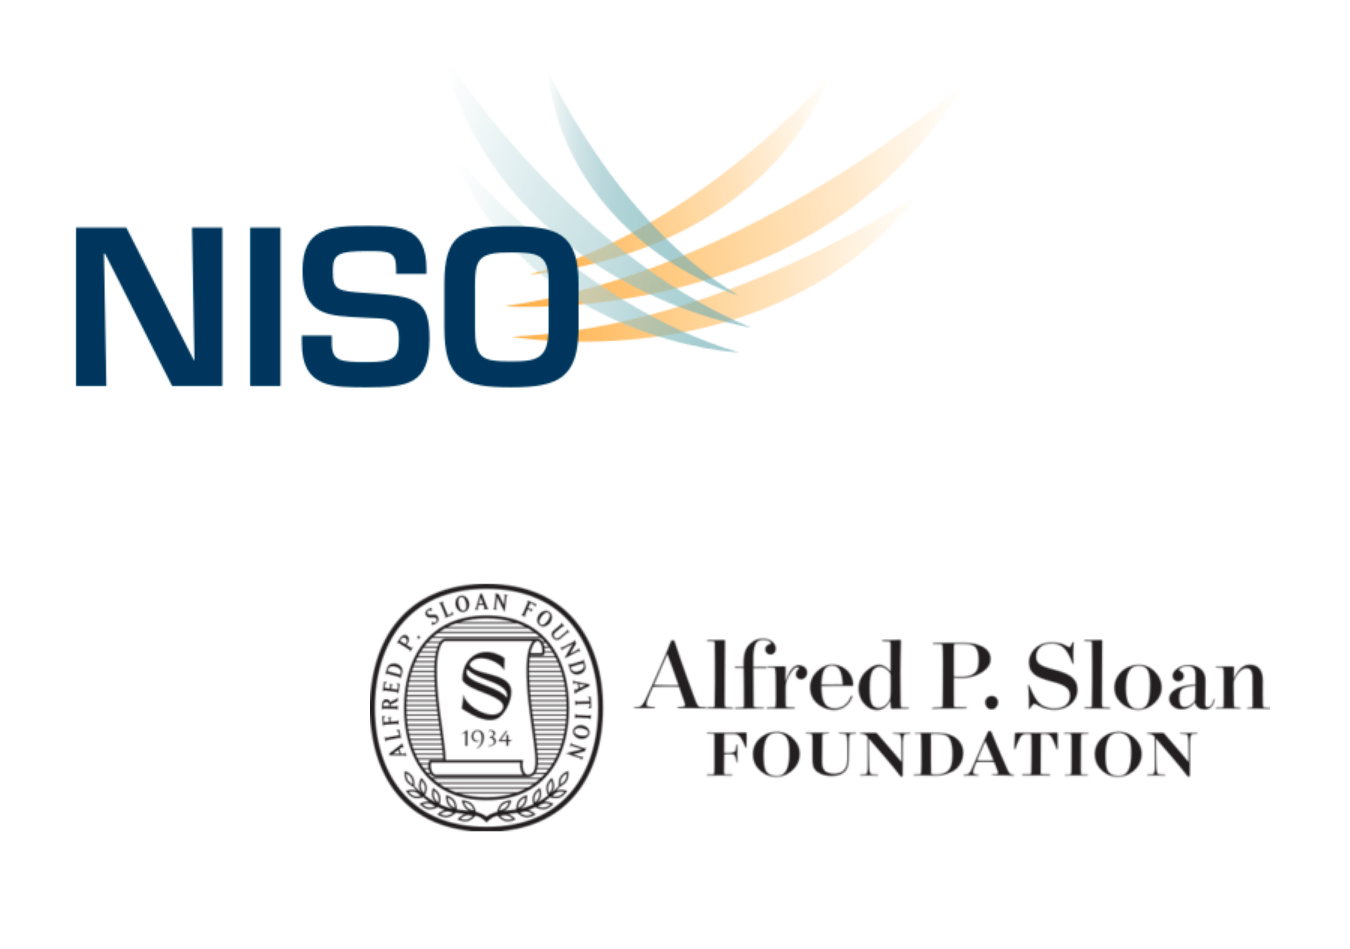 NISO and Alfred P. Sloan Foundation logos